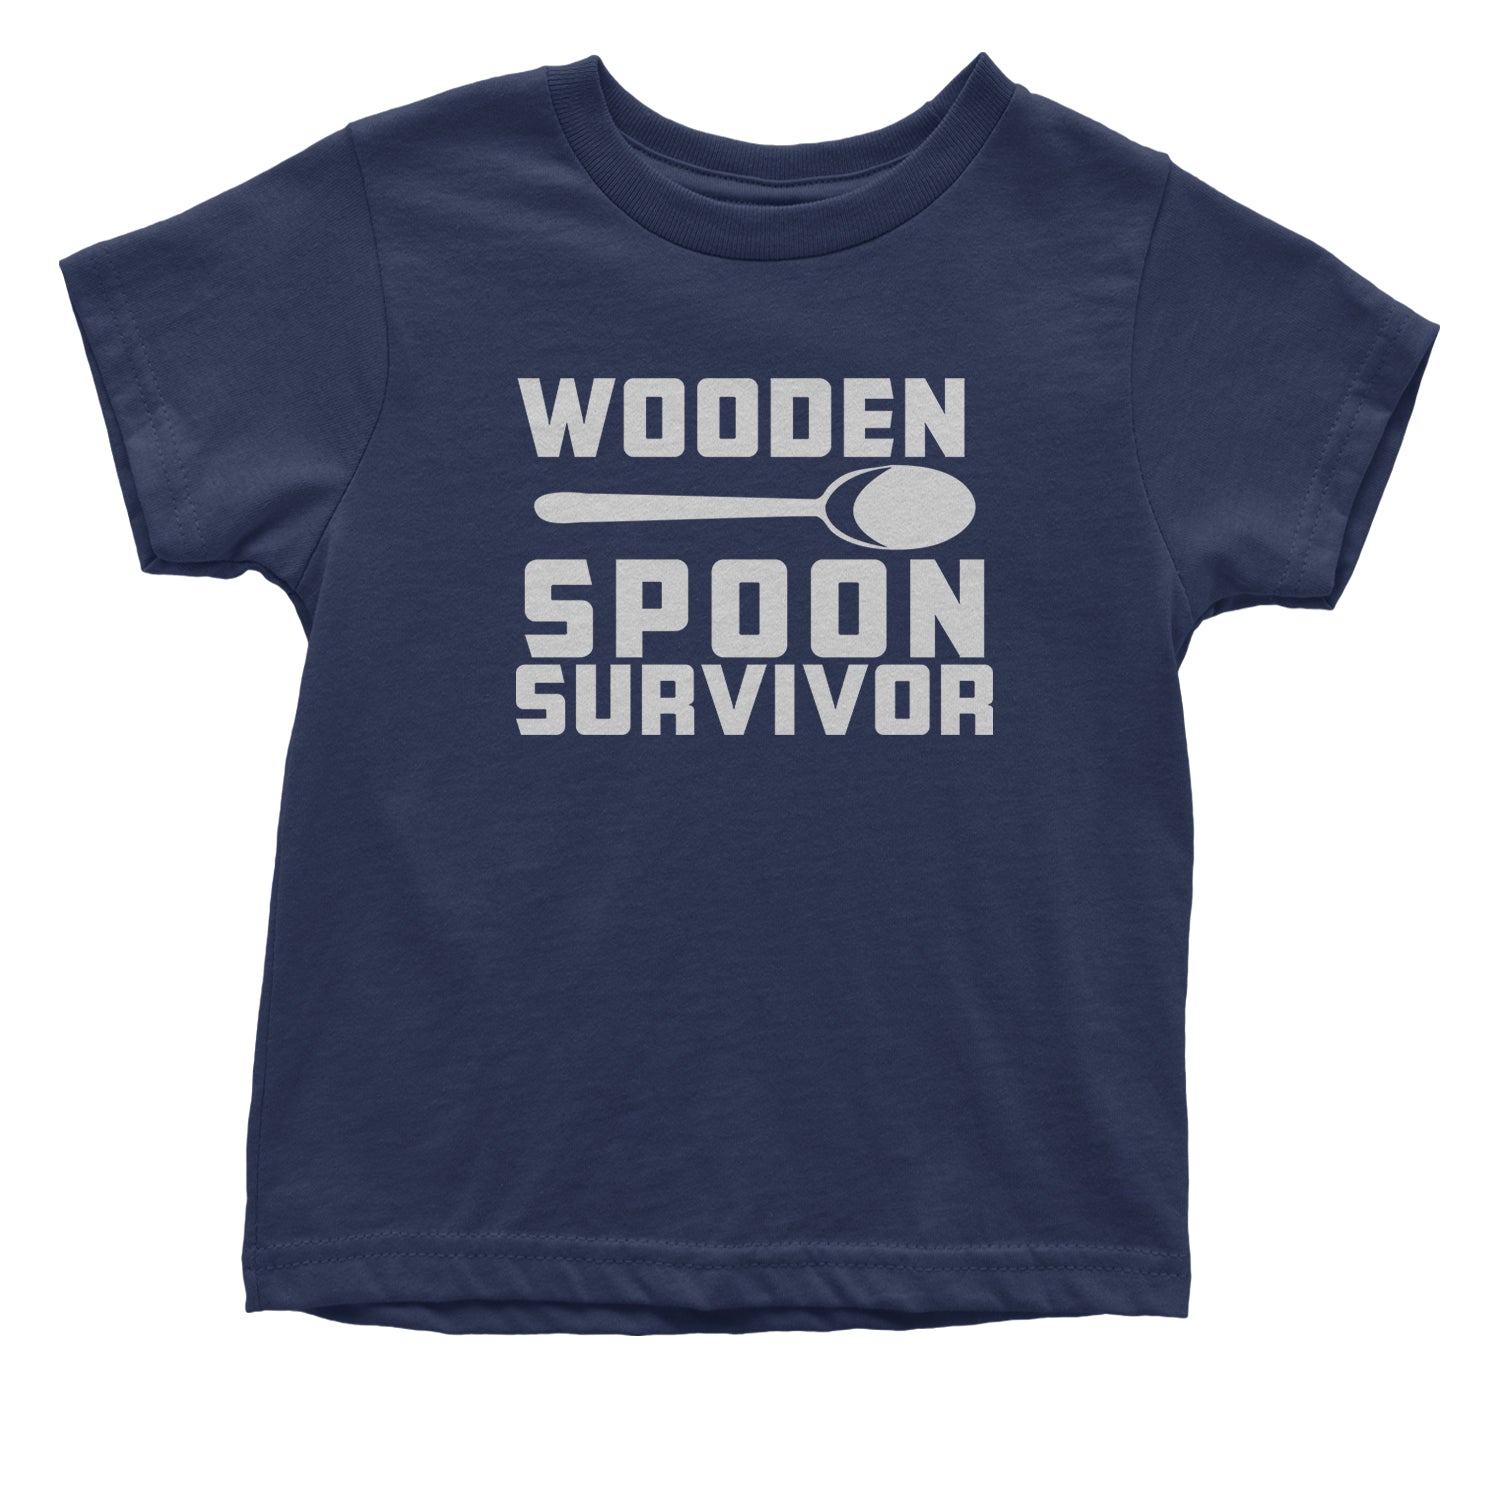 Wooden Spoon Survivor Infant One-Piece Romper Bodysuit and Toddler T-shirt funny, shirt, spoon, survivor, wooden by Expression Tees